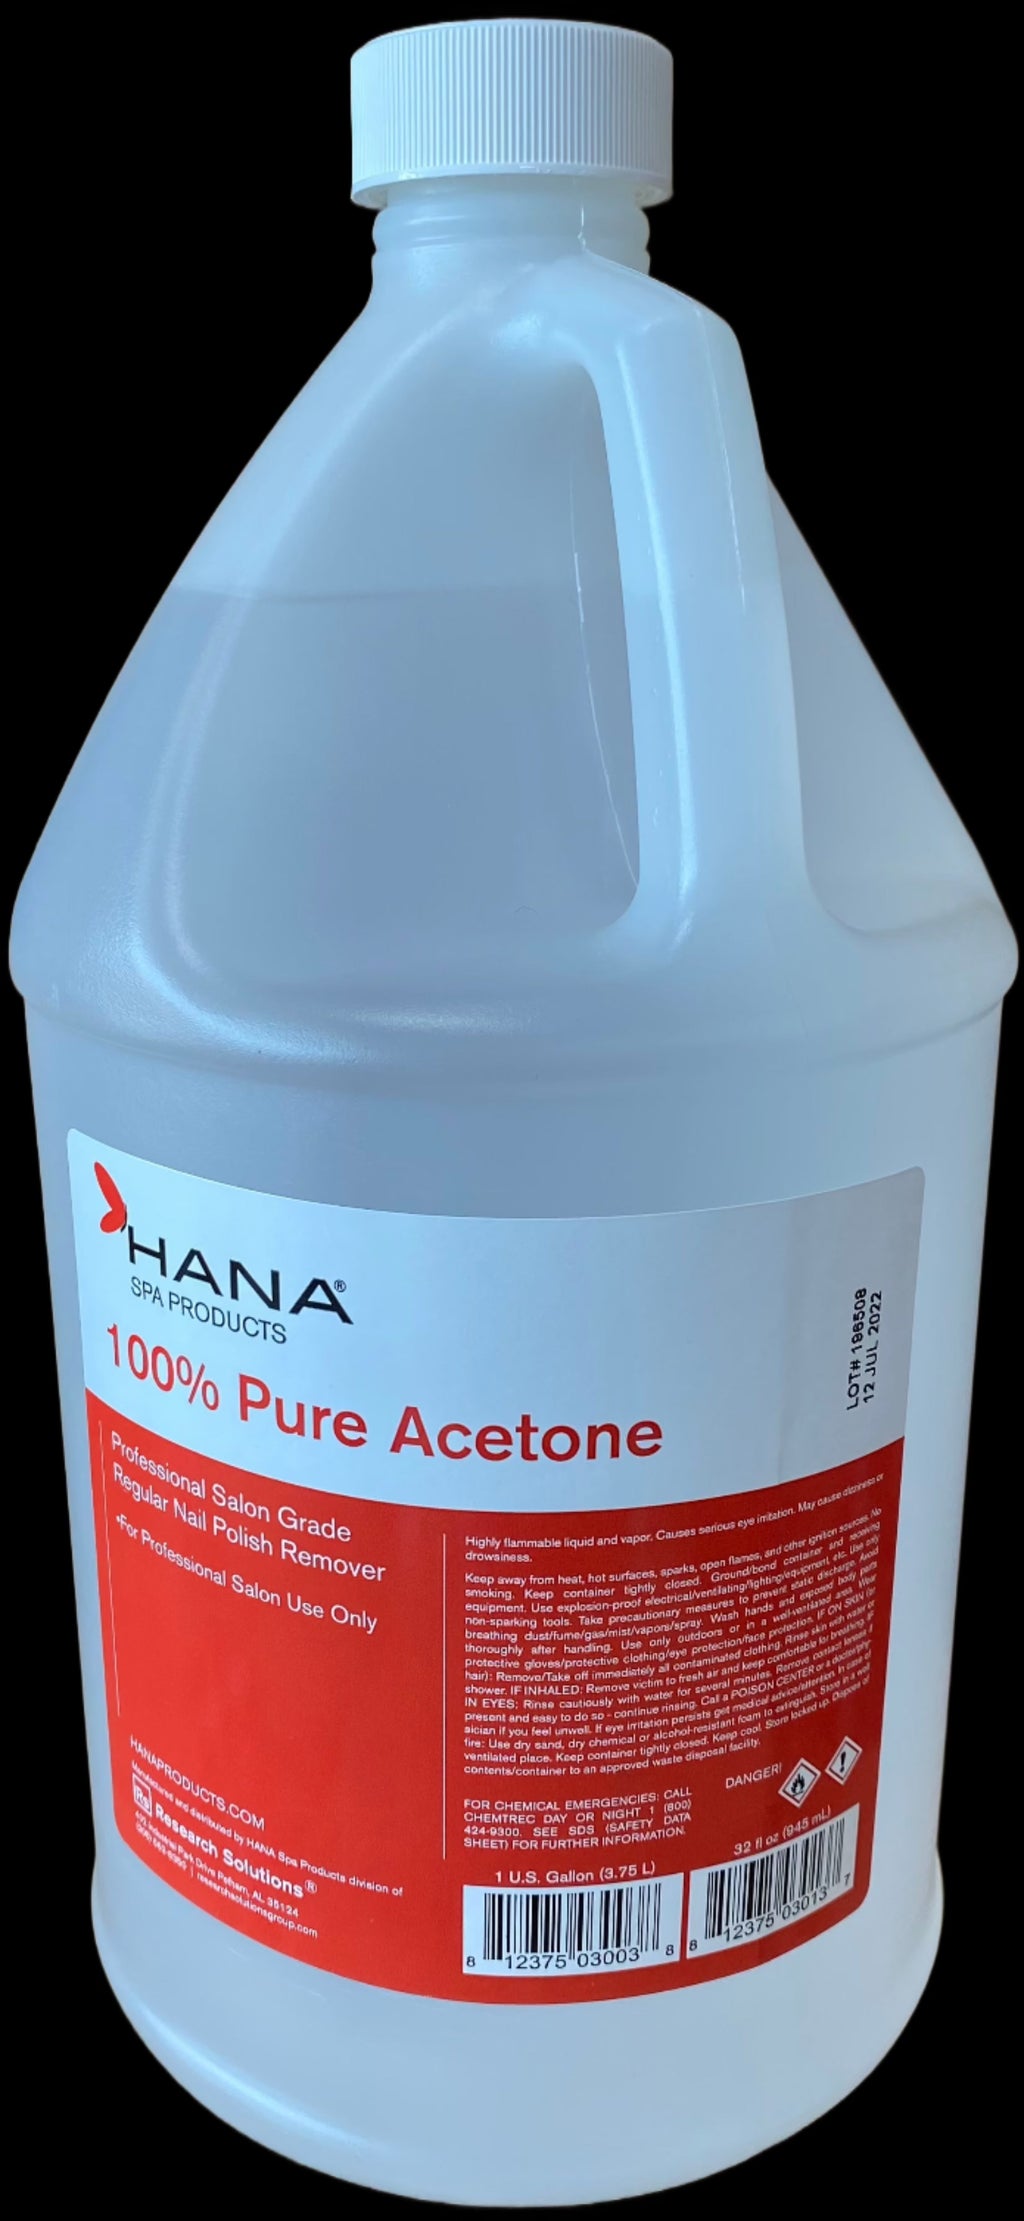 Buy Acetone Online, Acetone Nail Polish Remover